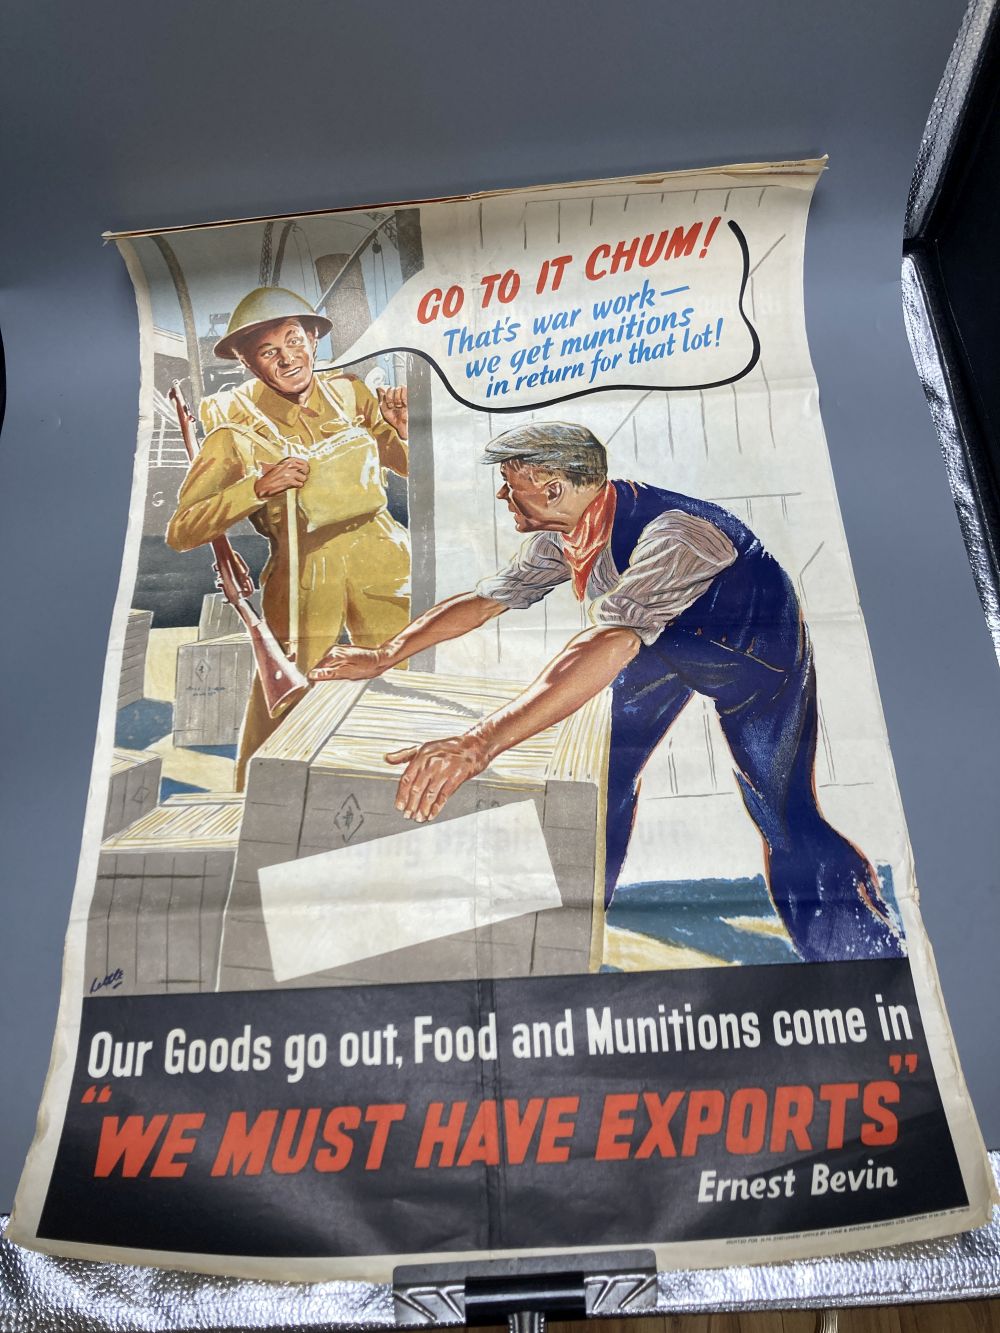 Three original WWII posters, 'Go To It Chaps', 'We Are on War Work' and 'We Must Have Exports'